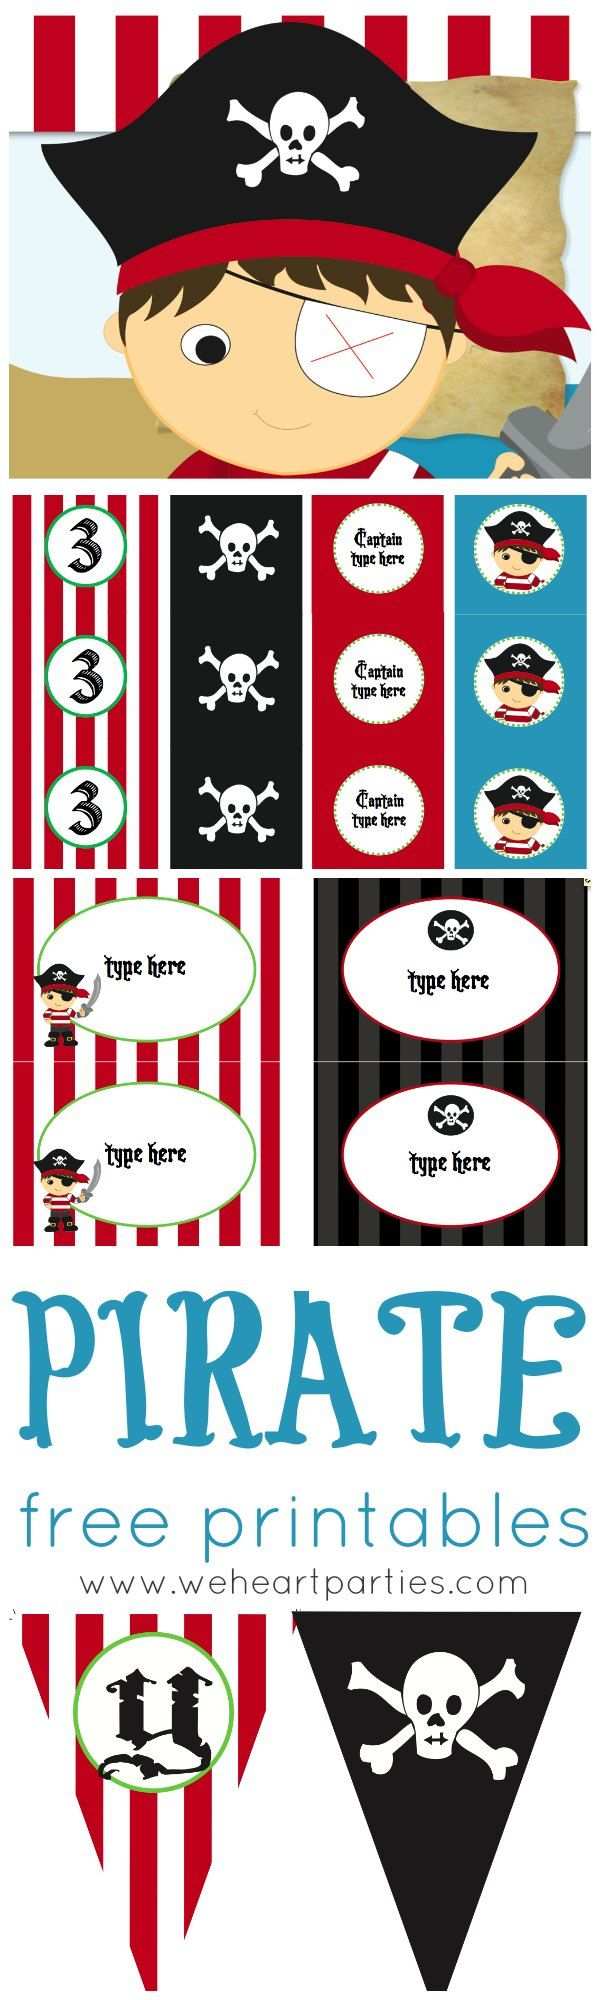 We Heart Parties Free Printables Pirate Party Free Printables Editable Pirate Party Pirate Birthday Party Pirate Theme Party